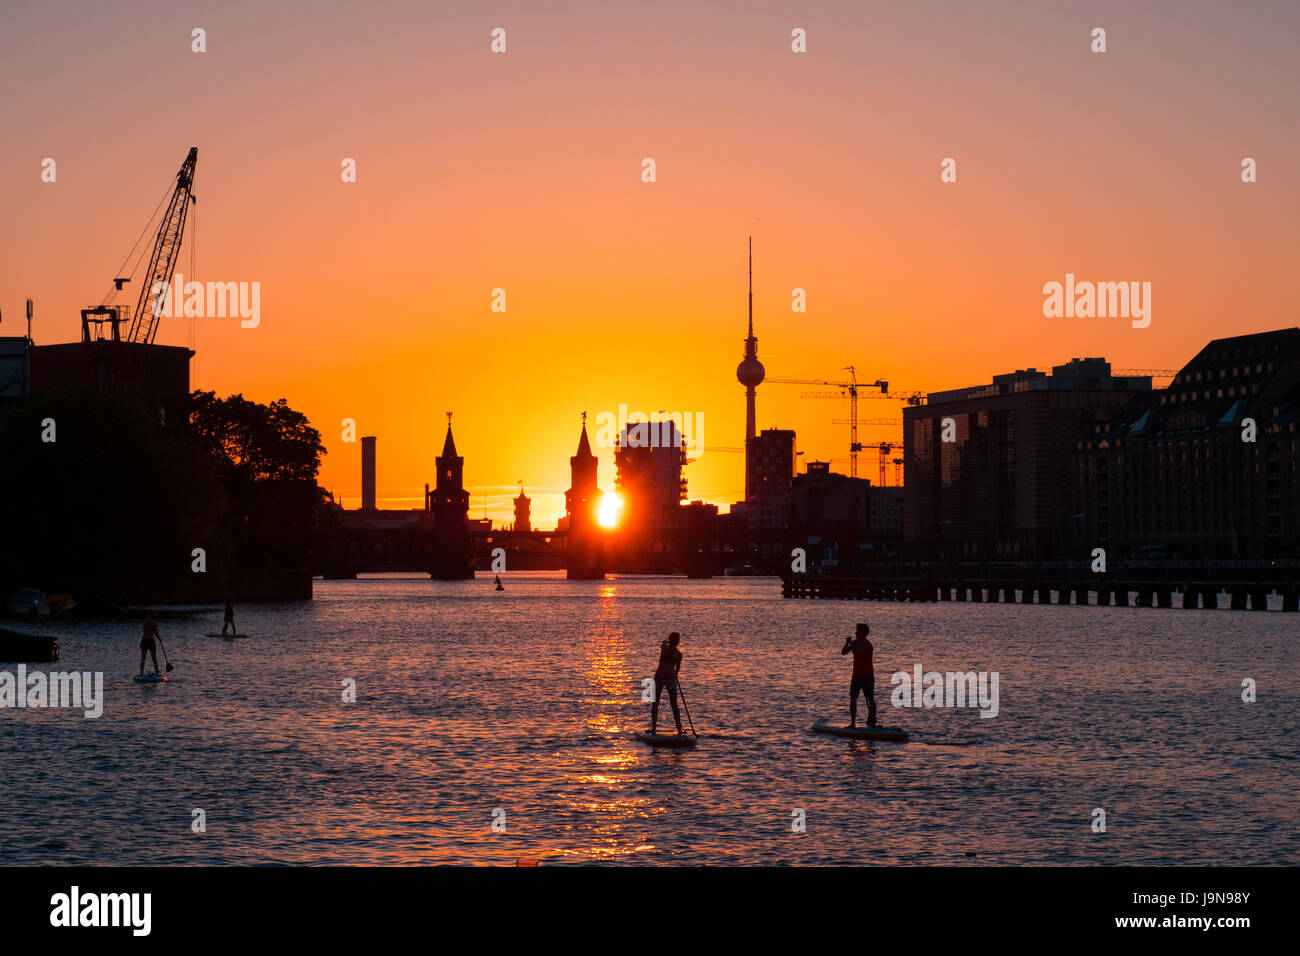 People on  paddle board / stand up paddler on river spree in Berlin - Oberbaum Bridge, Tv Tower and sunset sky background Stock Photo